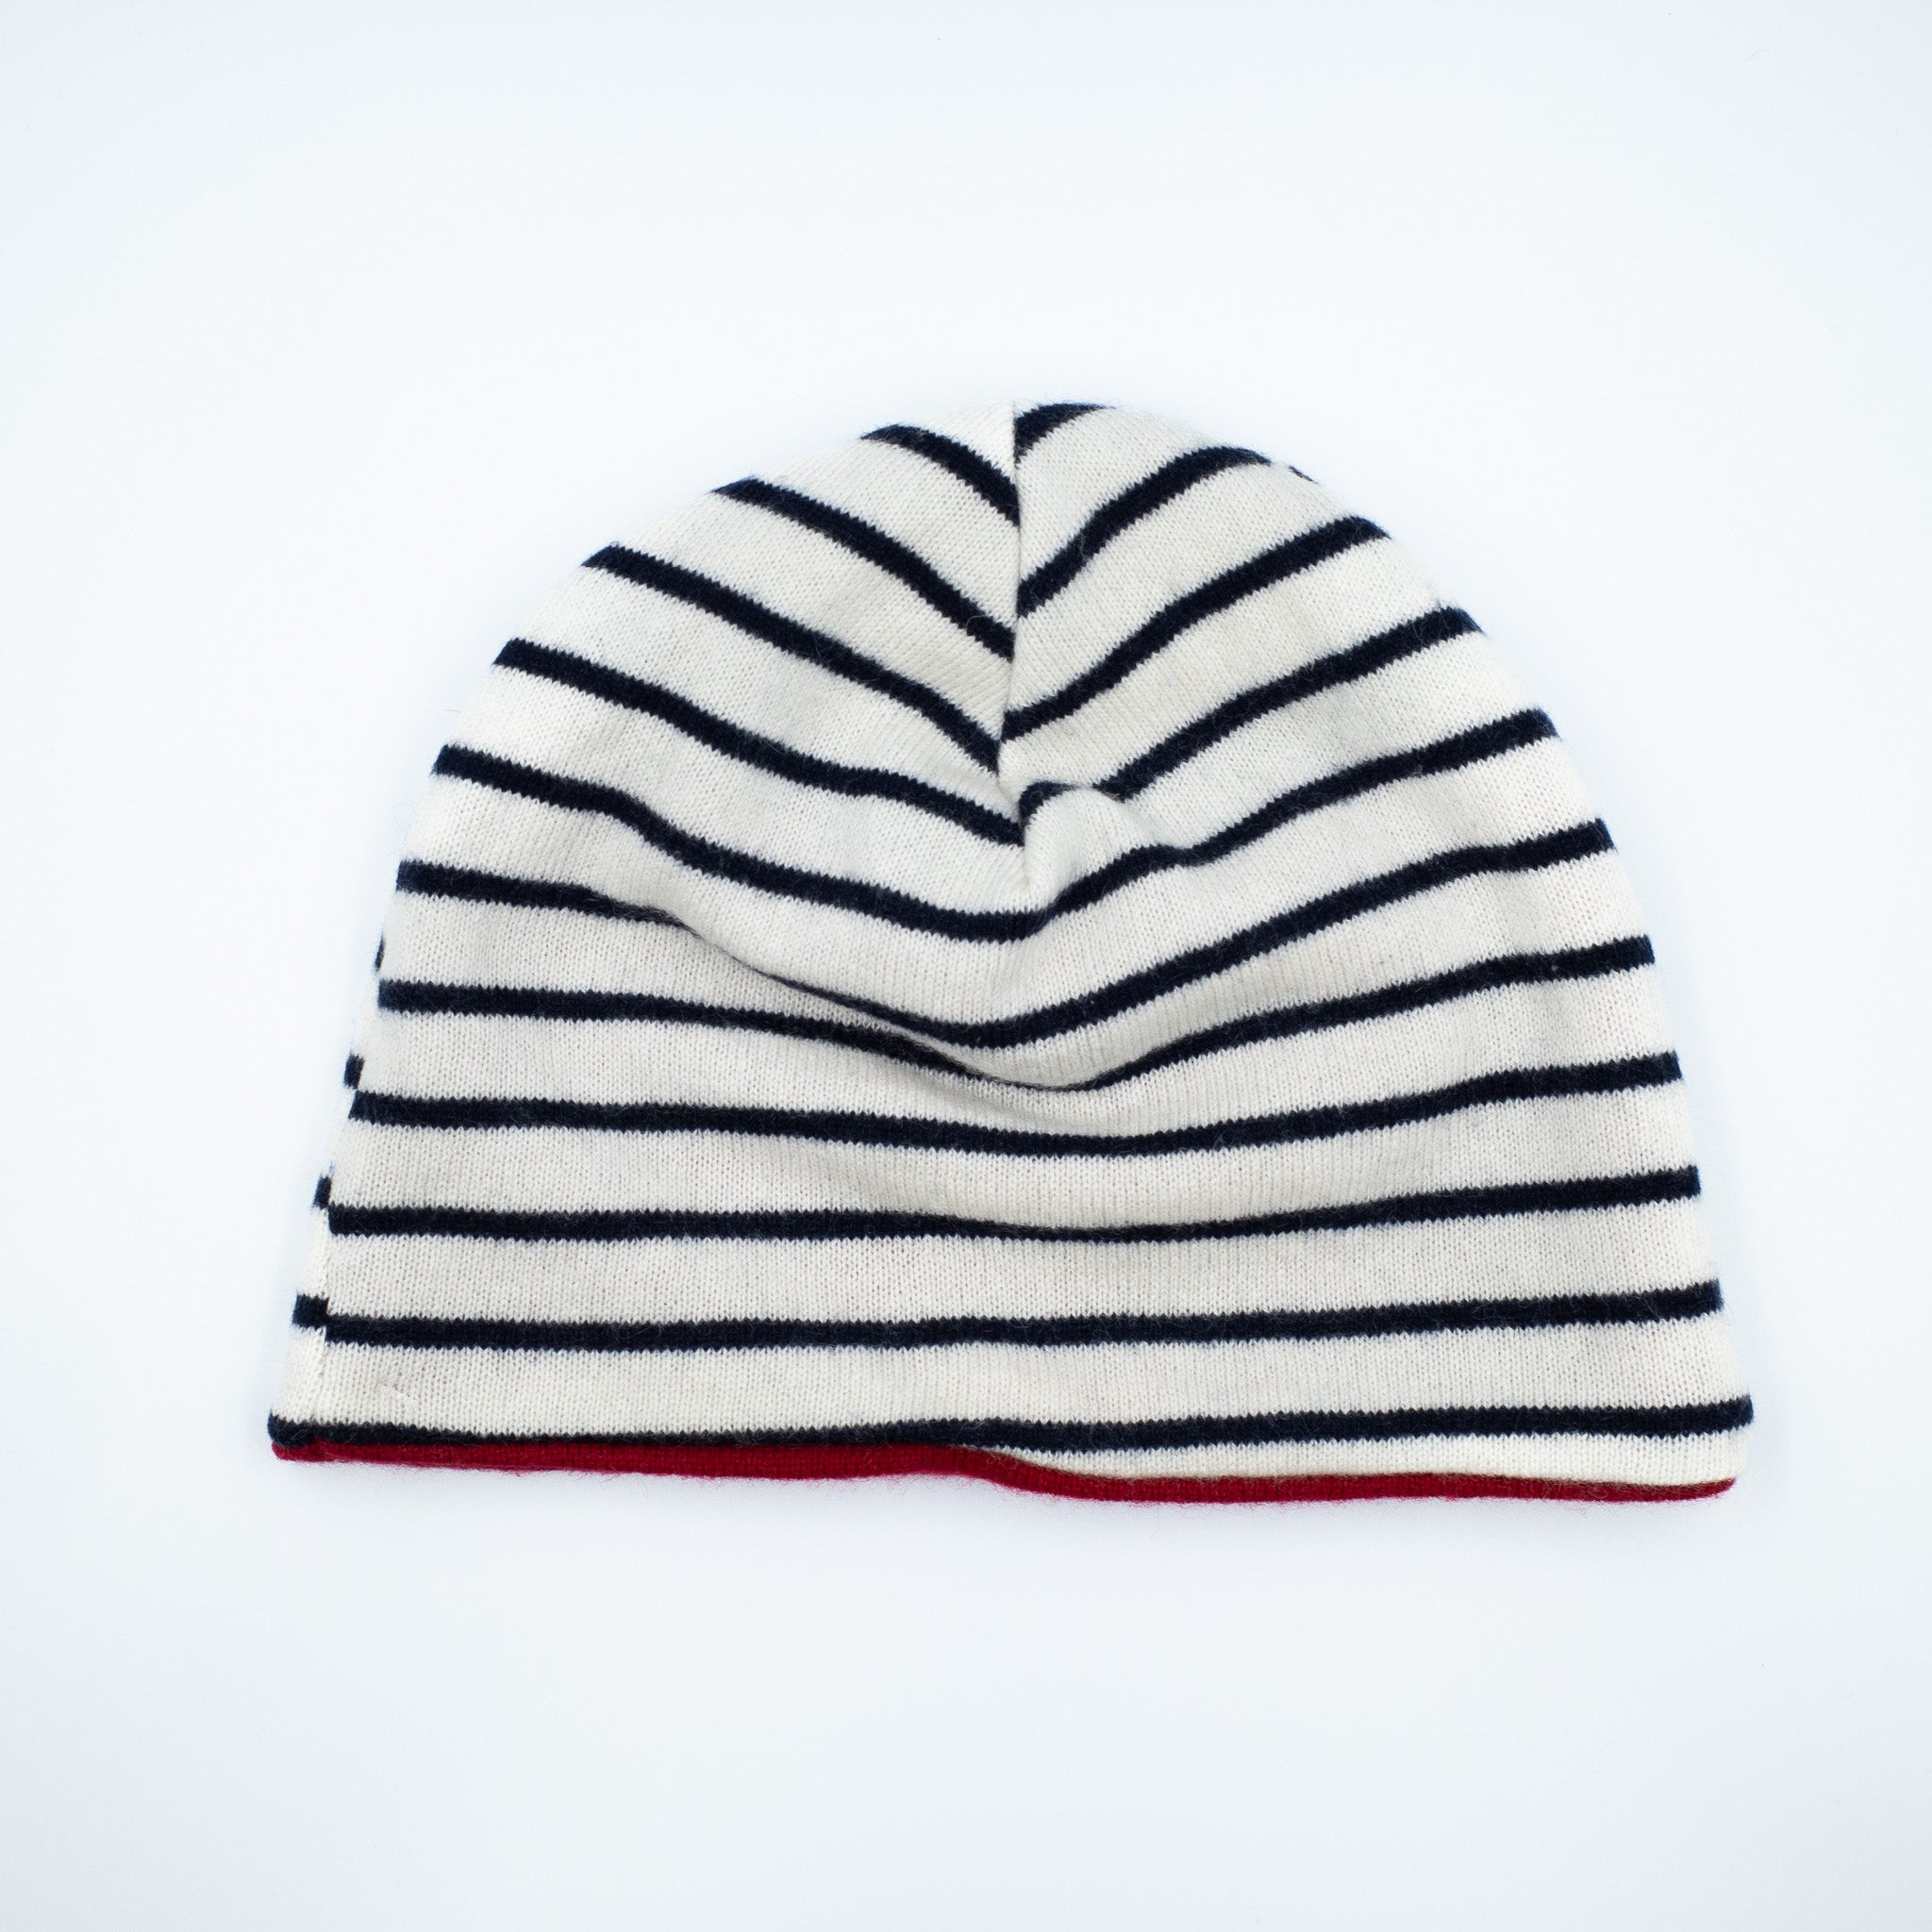 Black White Striped and Scarlet Red Cashmere Beanie Hat